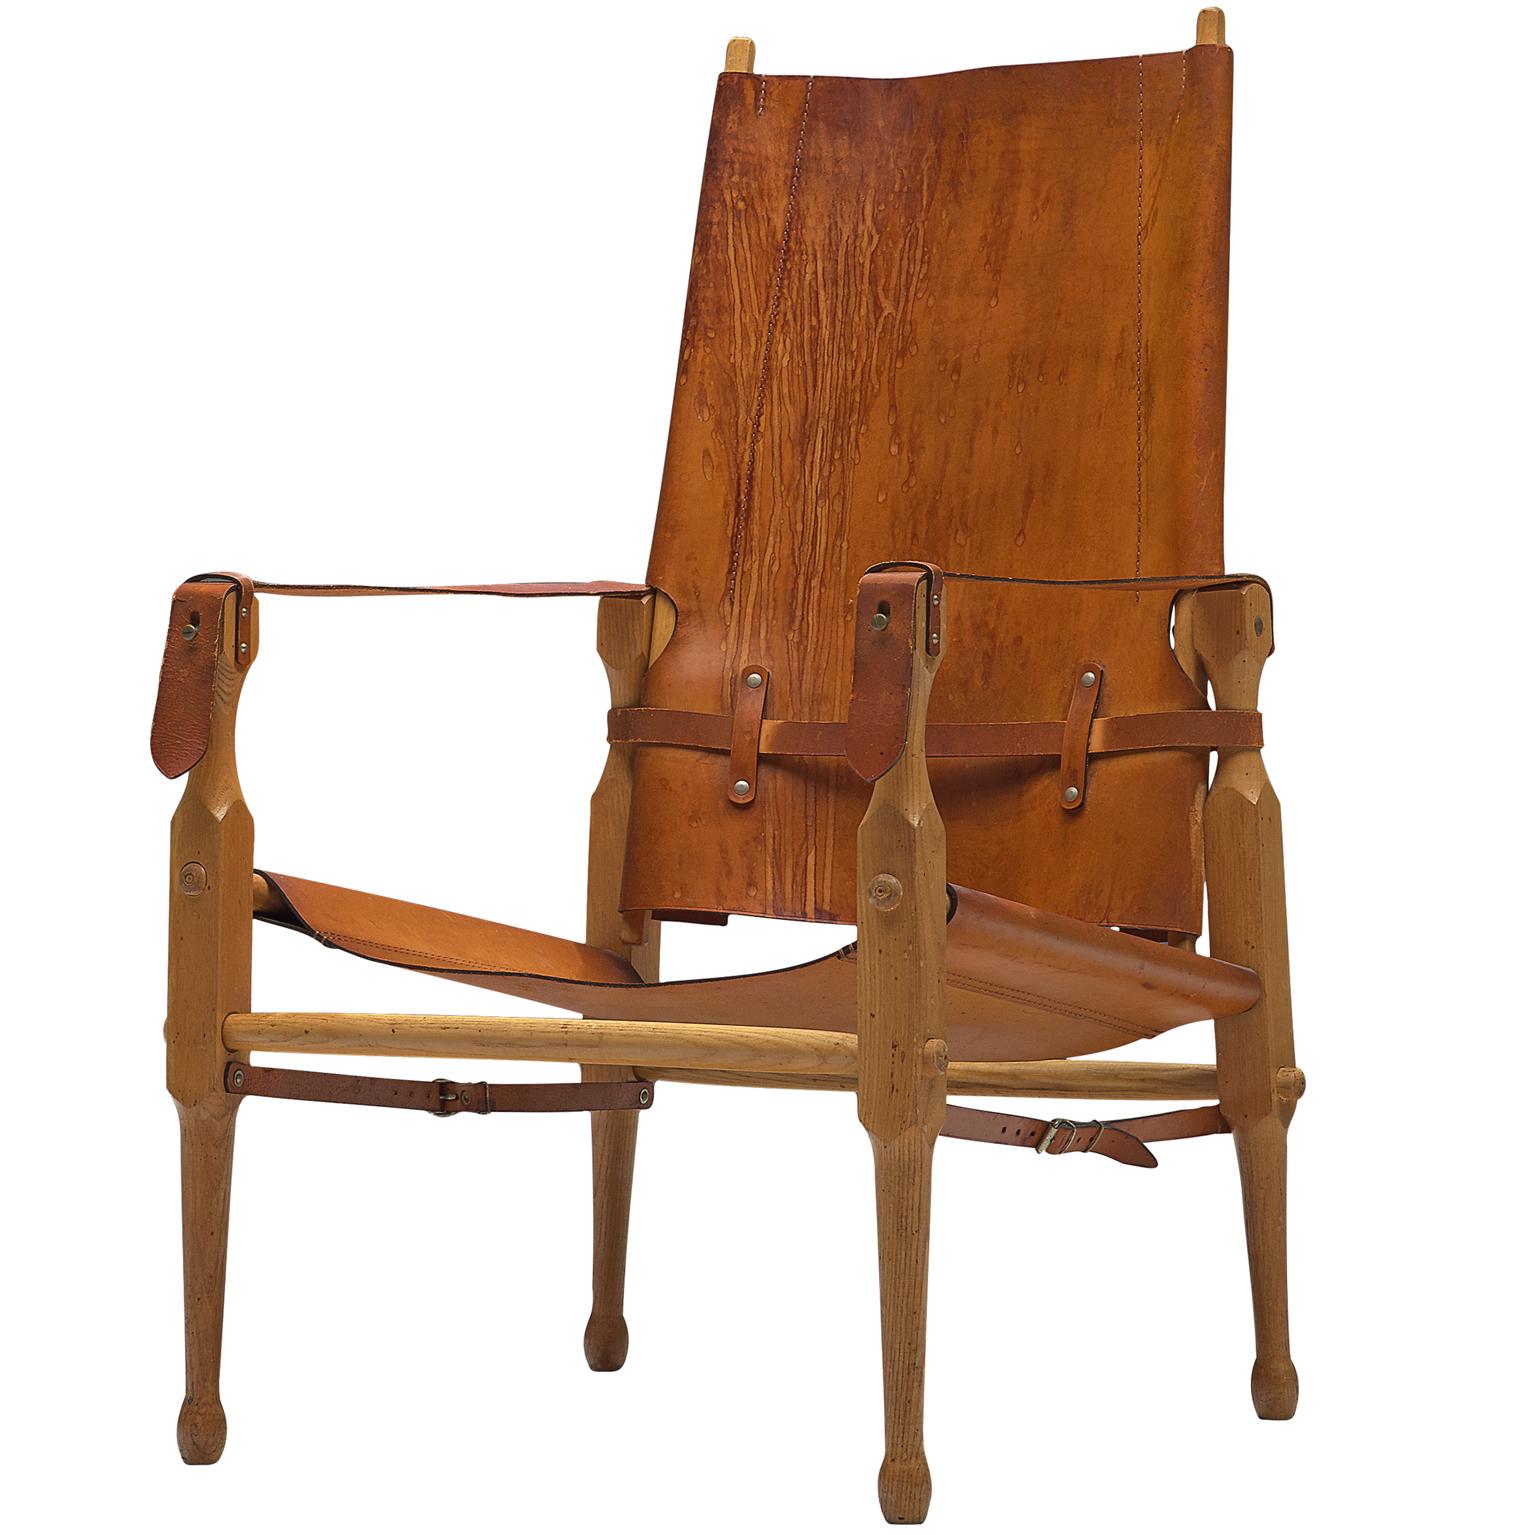 'Safari' Lounge Chair in Cognac Leather and Solid Beech